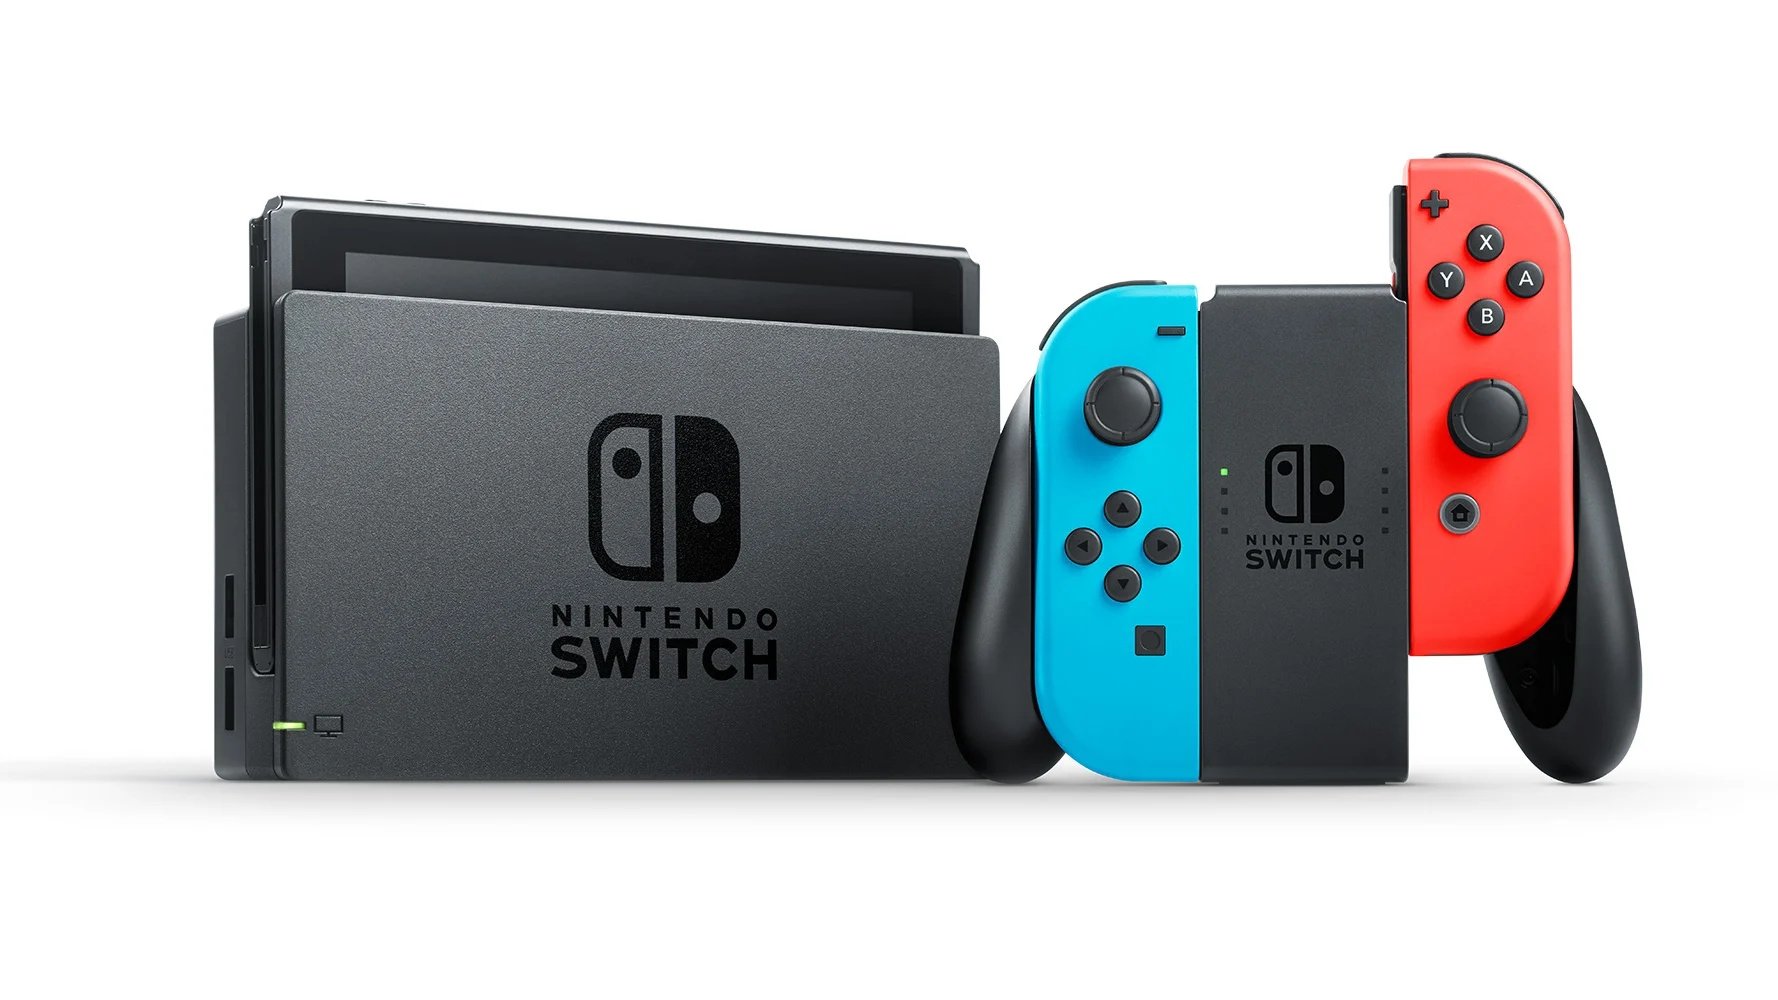 Nintendo Switch Accounts Are Getting Hacked, Enable 2FA To Secure Your Account